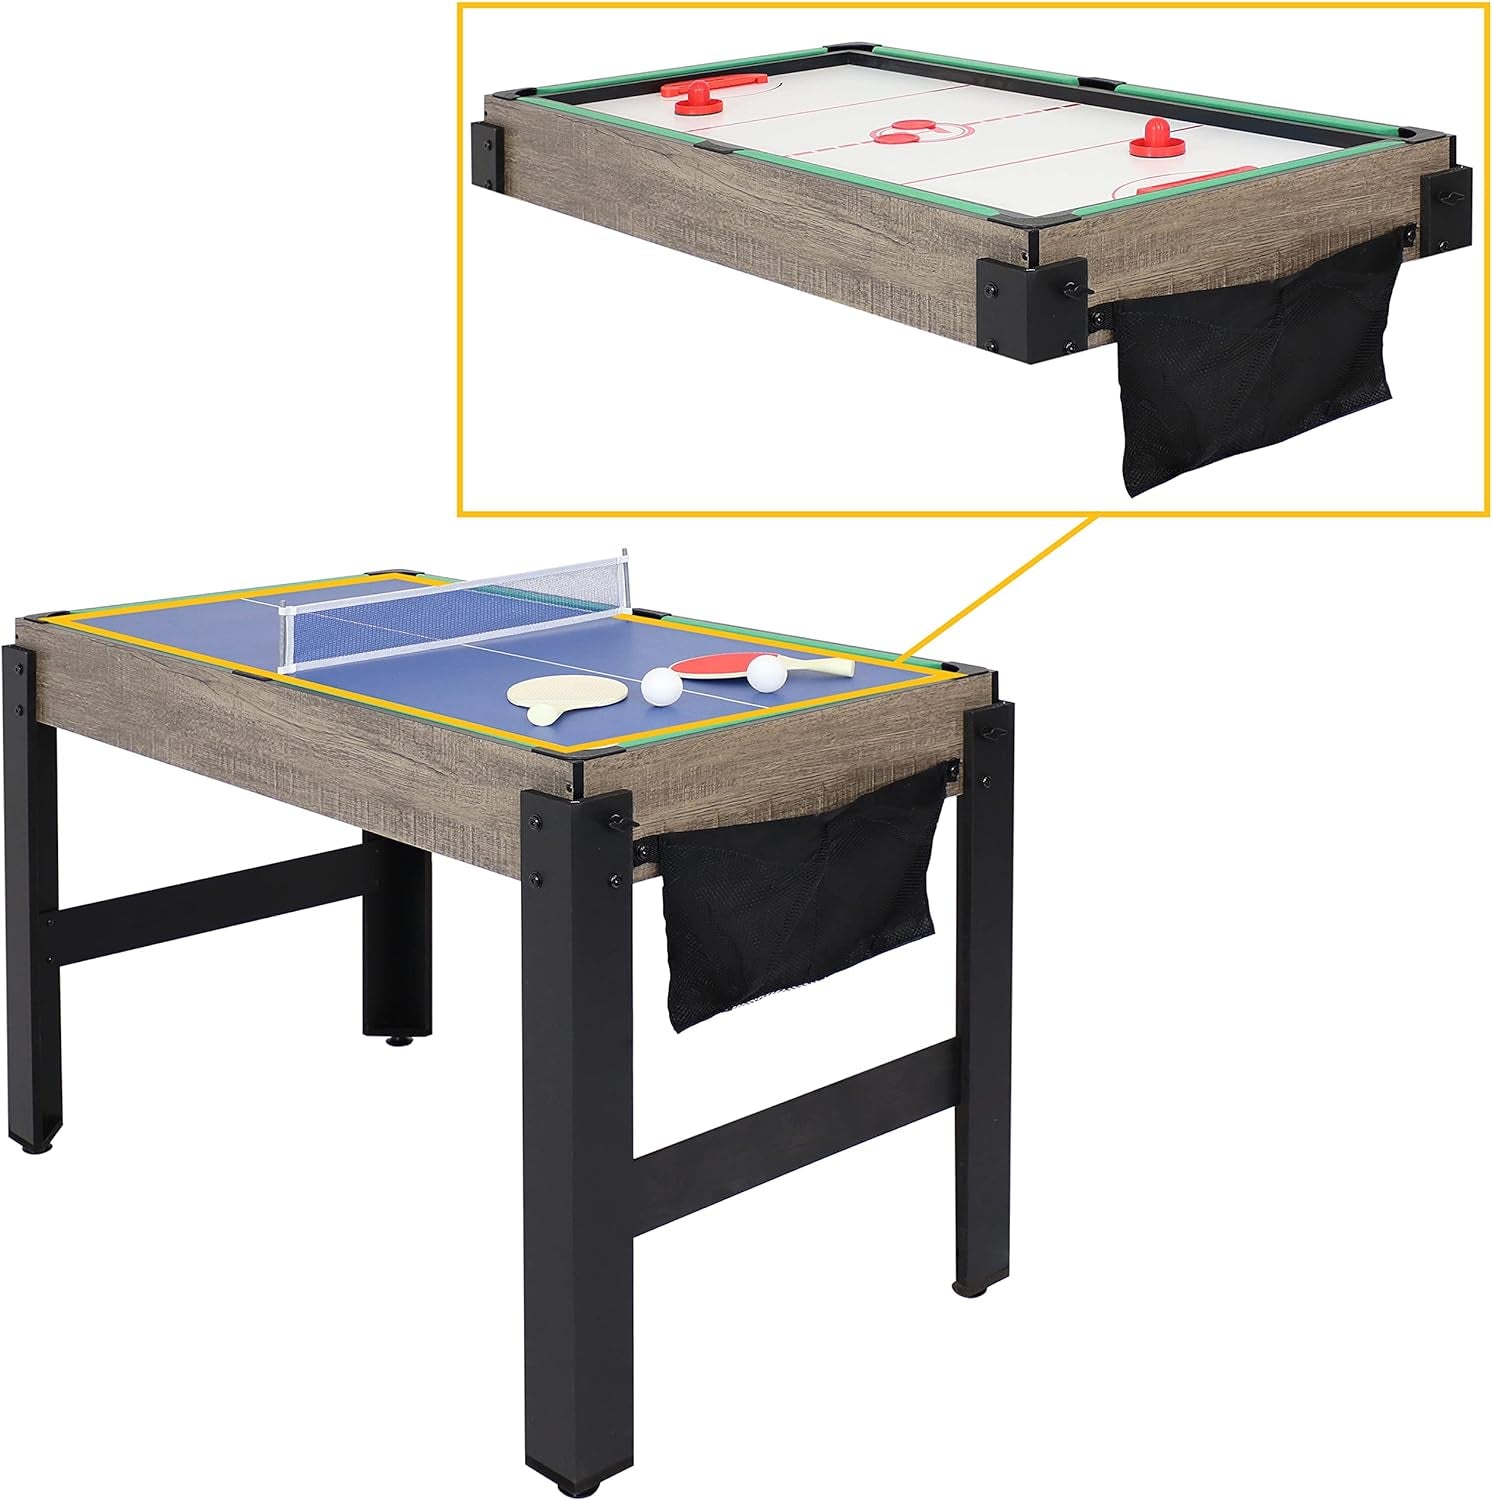 45-Inch 5-In-1 Multi-Game Table - Billiards, Push Hockey, Foosball, Ping Pong, and Basketball - Weathered Gray